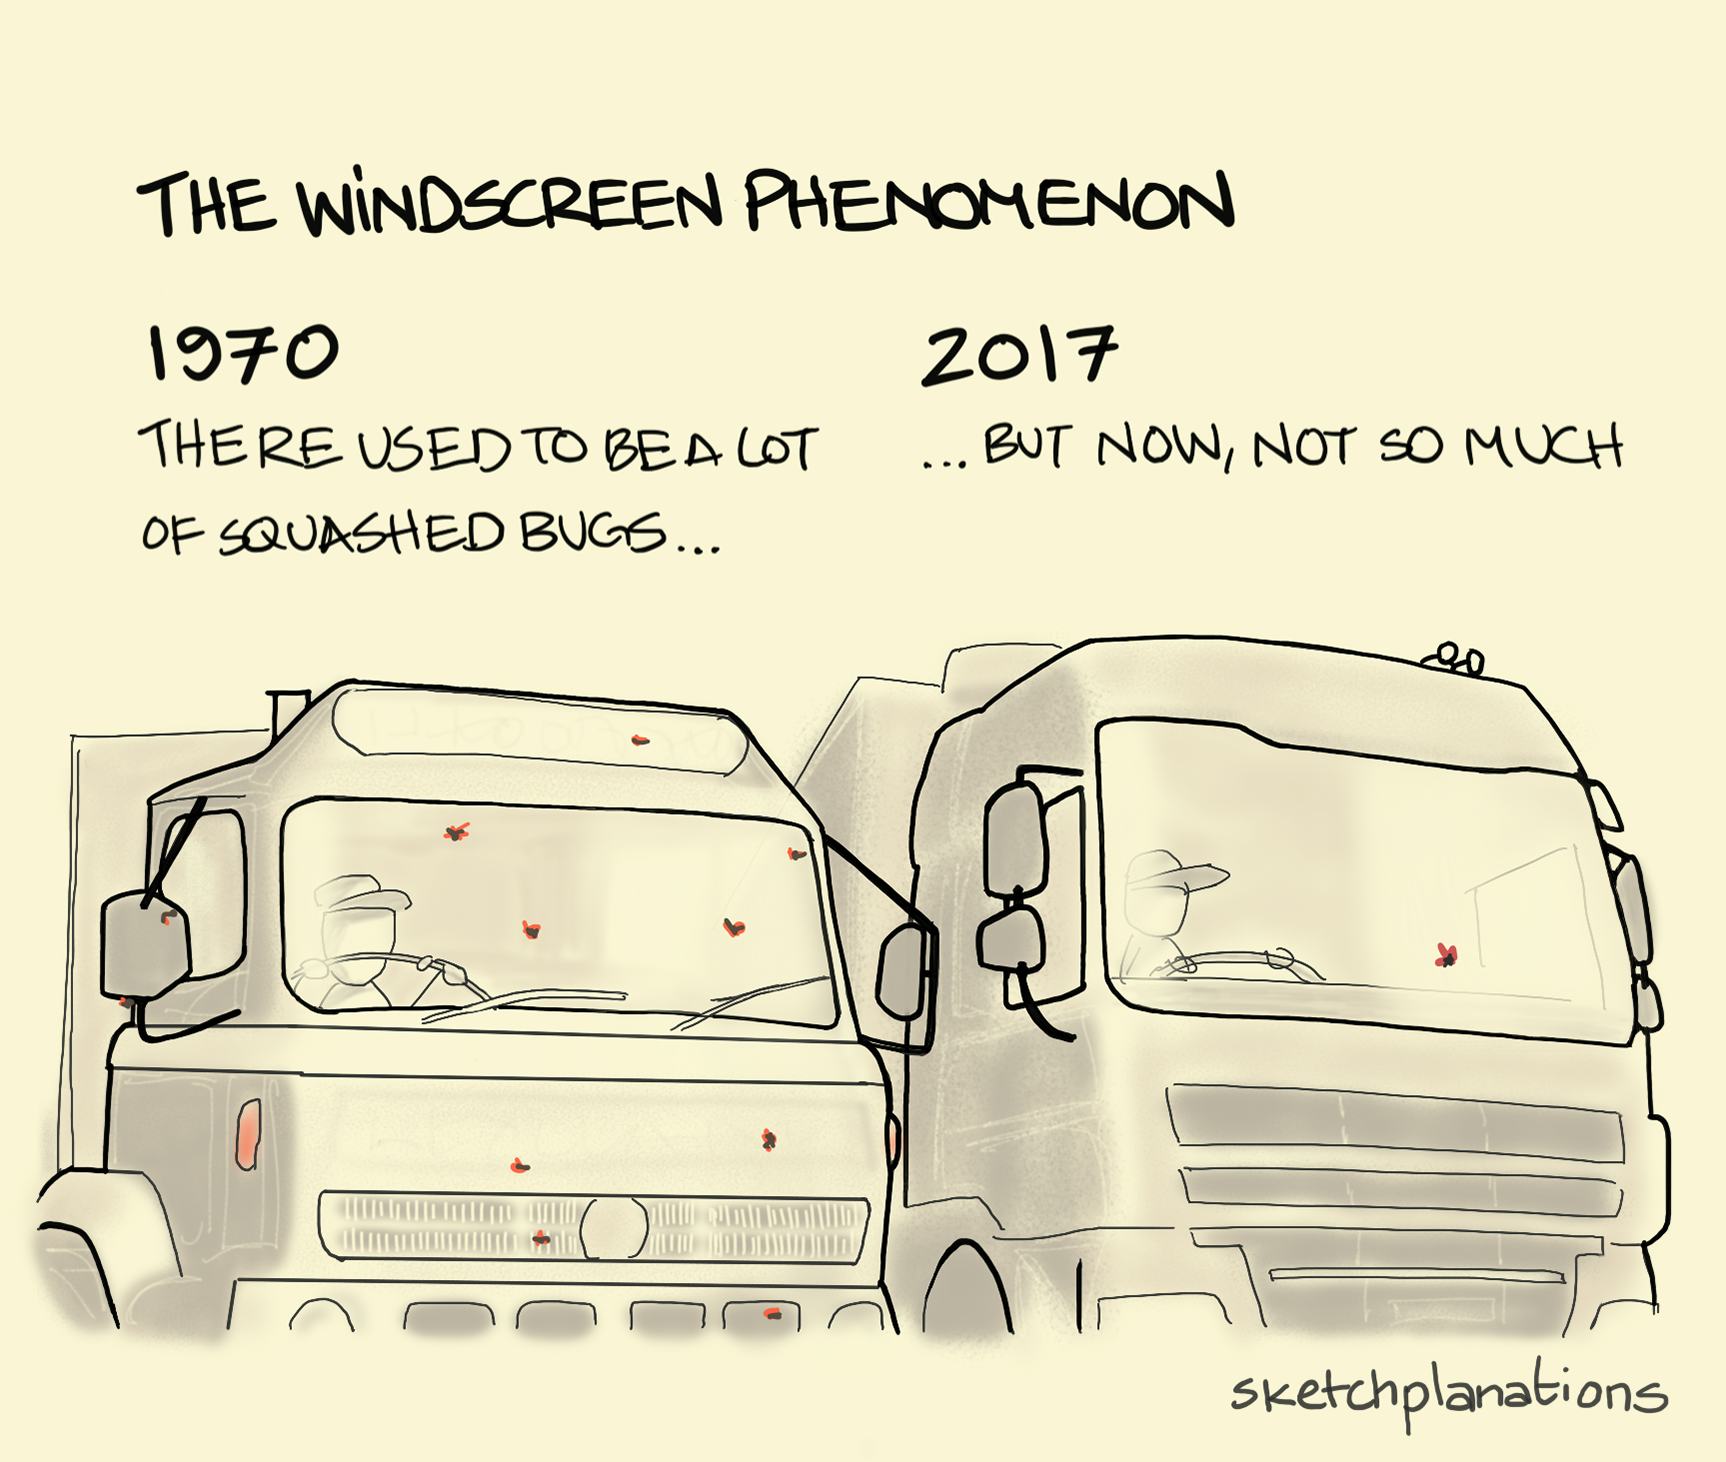 The windscreen phenomenon illustration: showing a 1970 truck with bugs splattered on the windscreen and a 2017 with very few, reflecting, most likely a general decline in flying insects